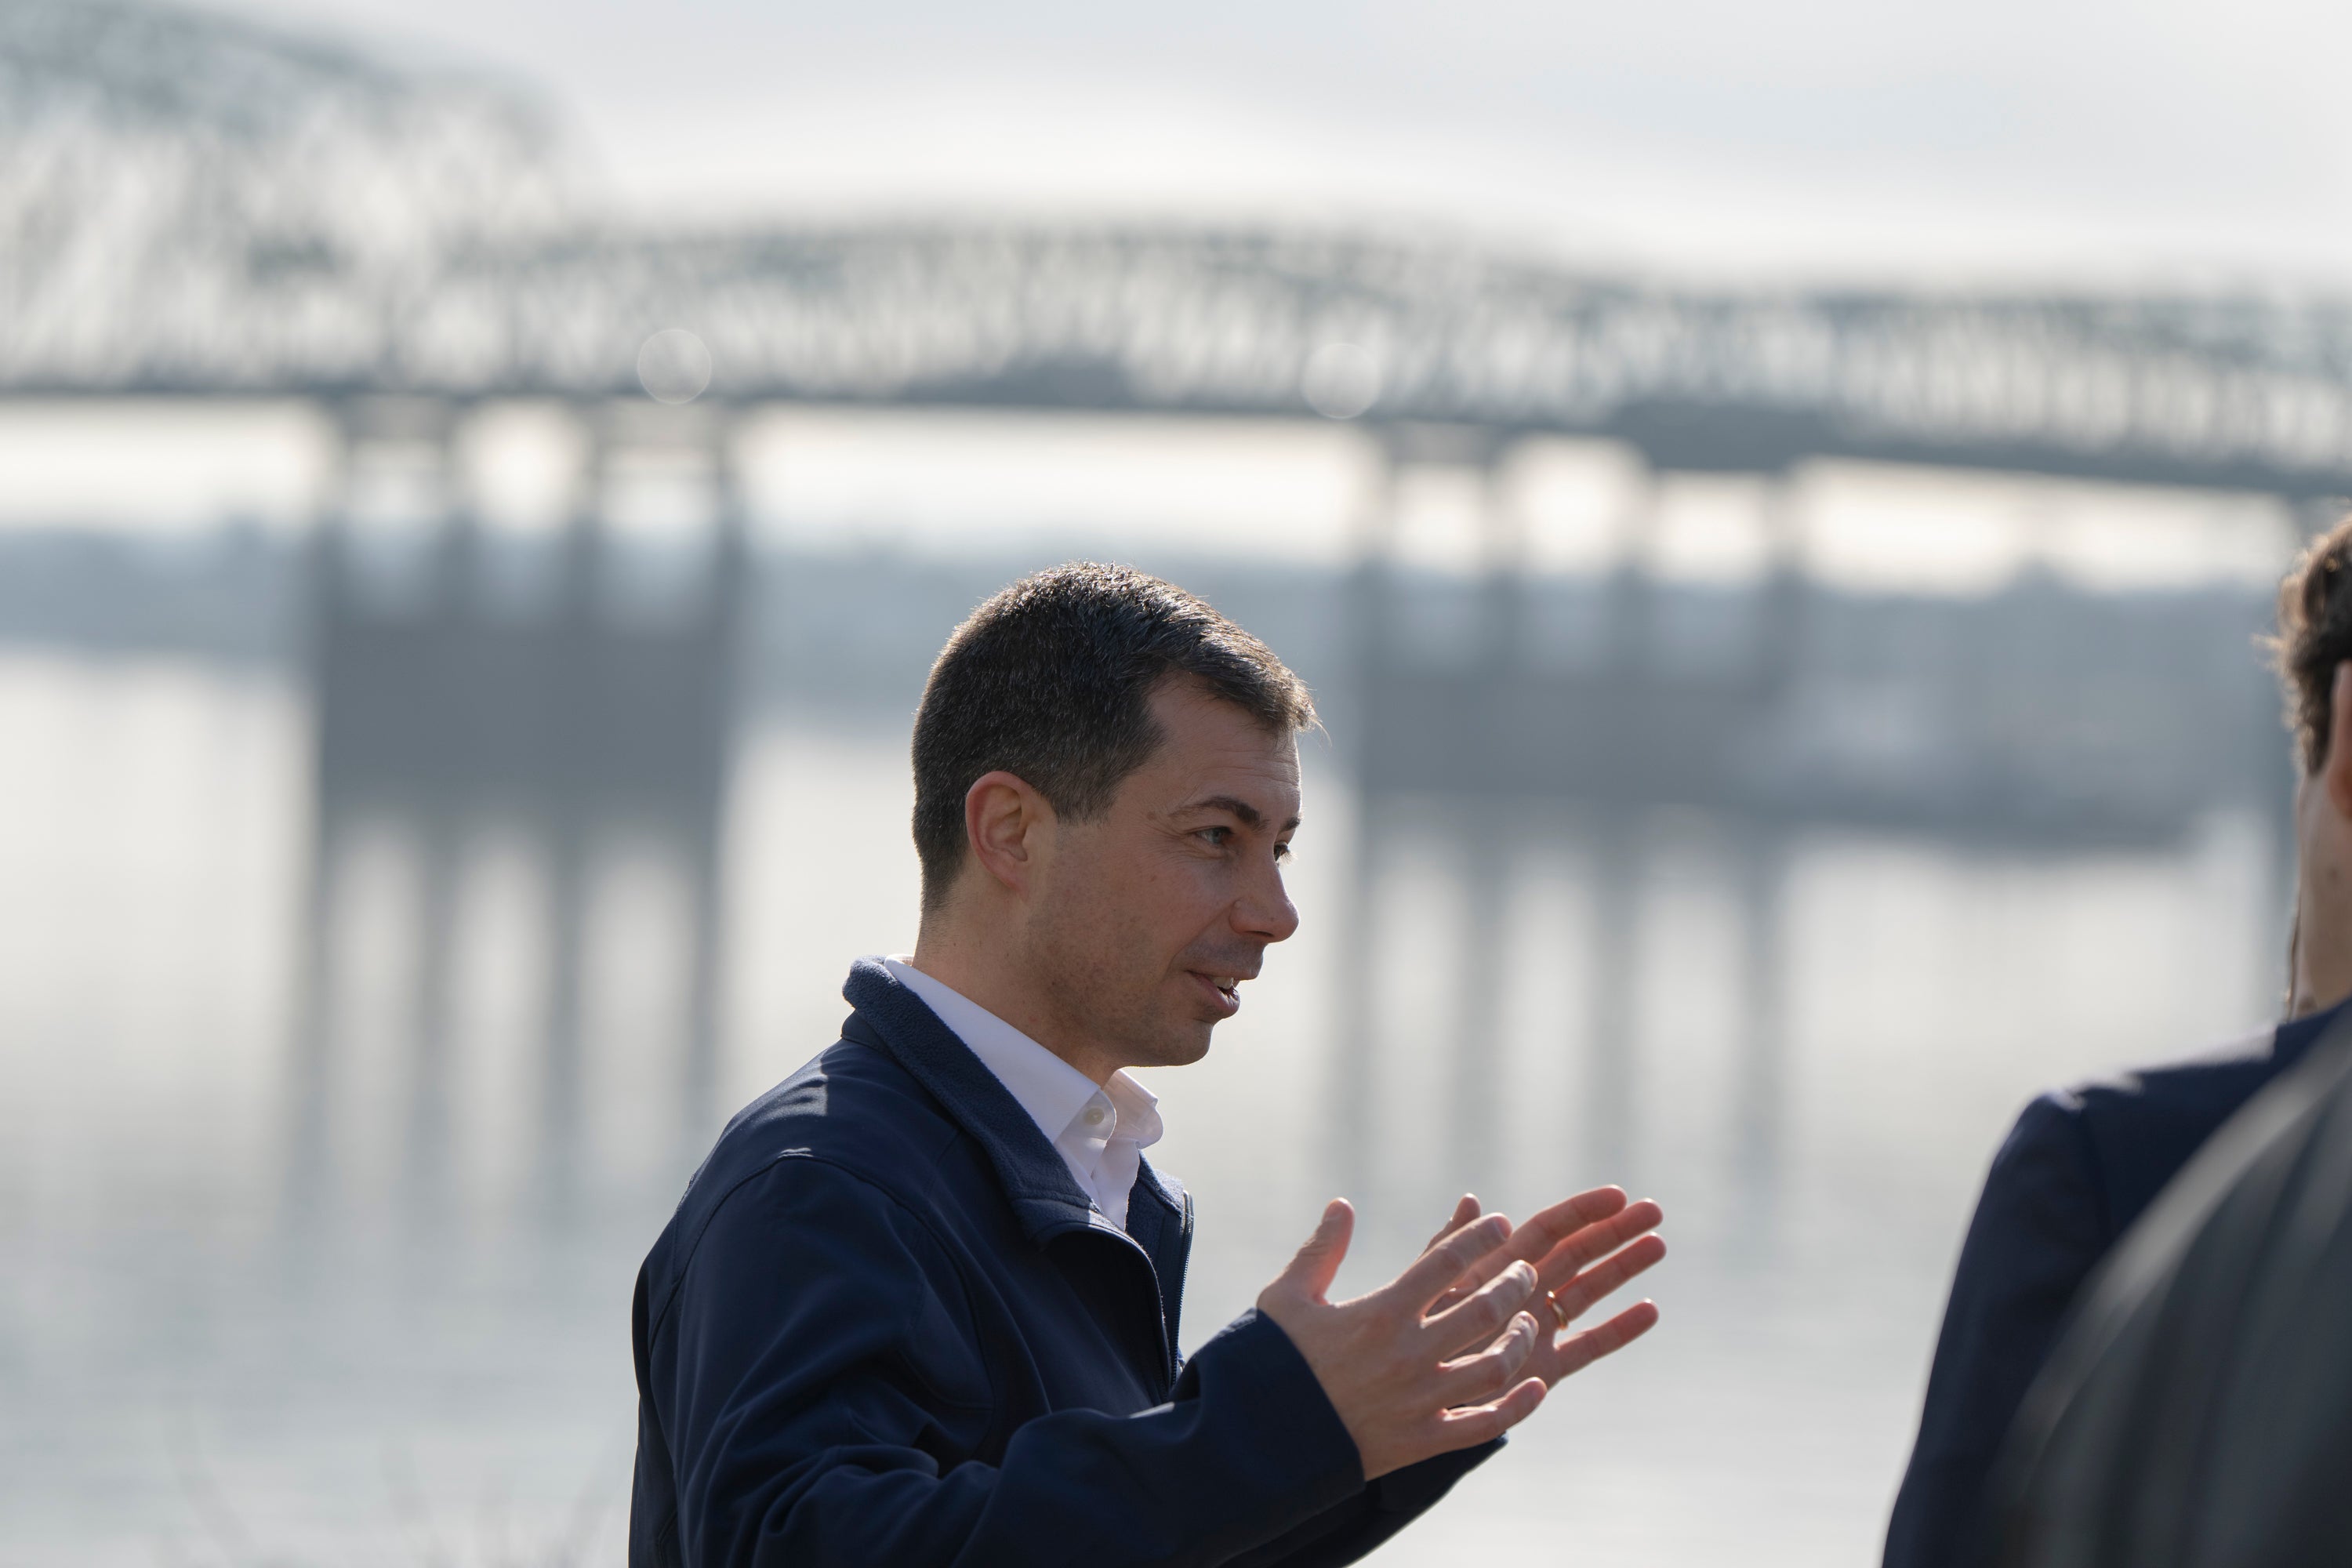 Pete Buttigieg ran for the Democratic nomination in 2020 and has served as transportation secretary since Biden took office